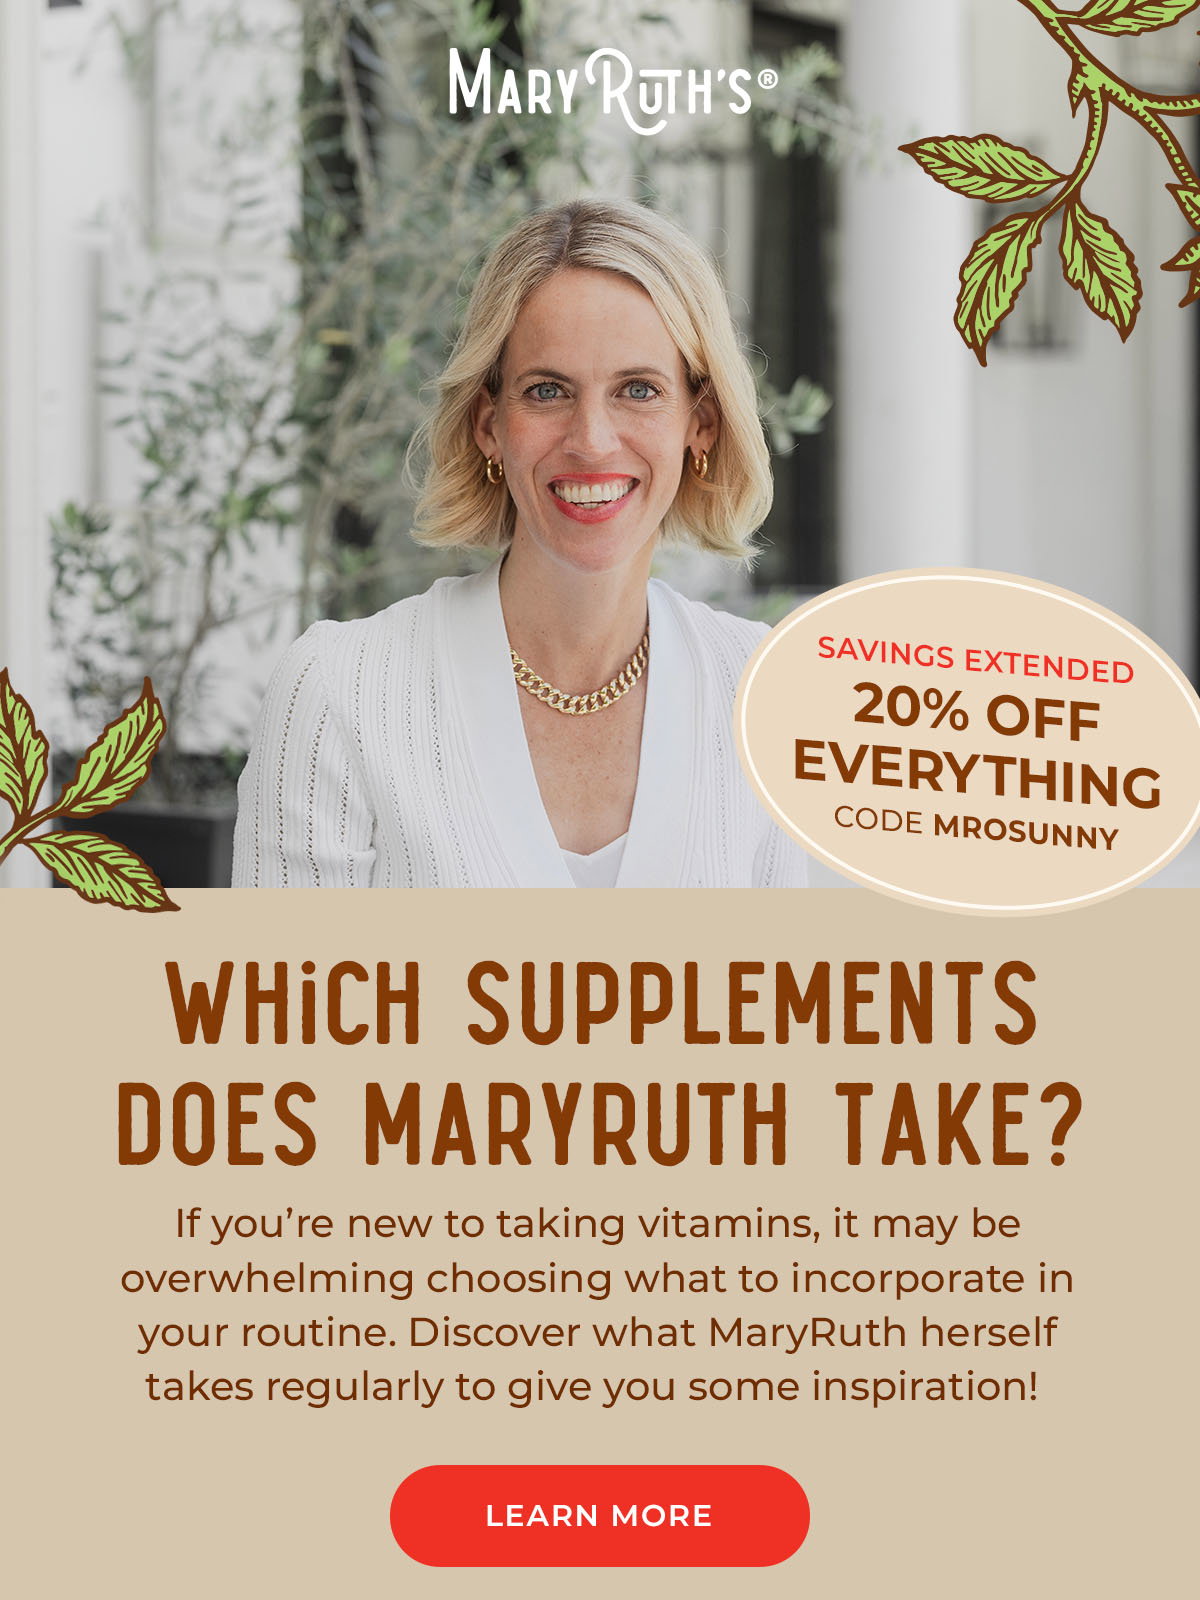 Discover what MaryRuth herself takes regularly. Learn More!